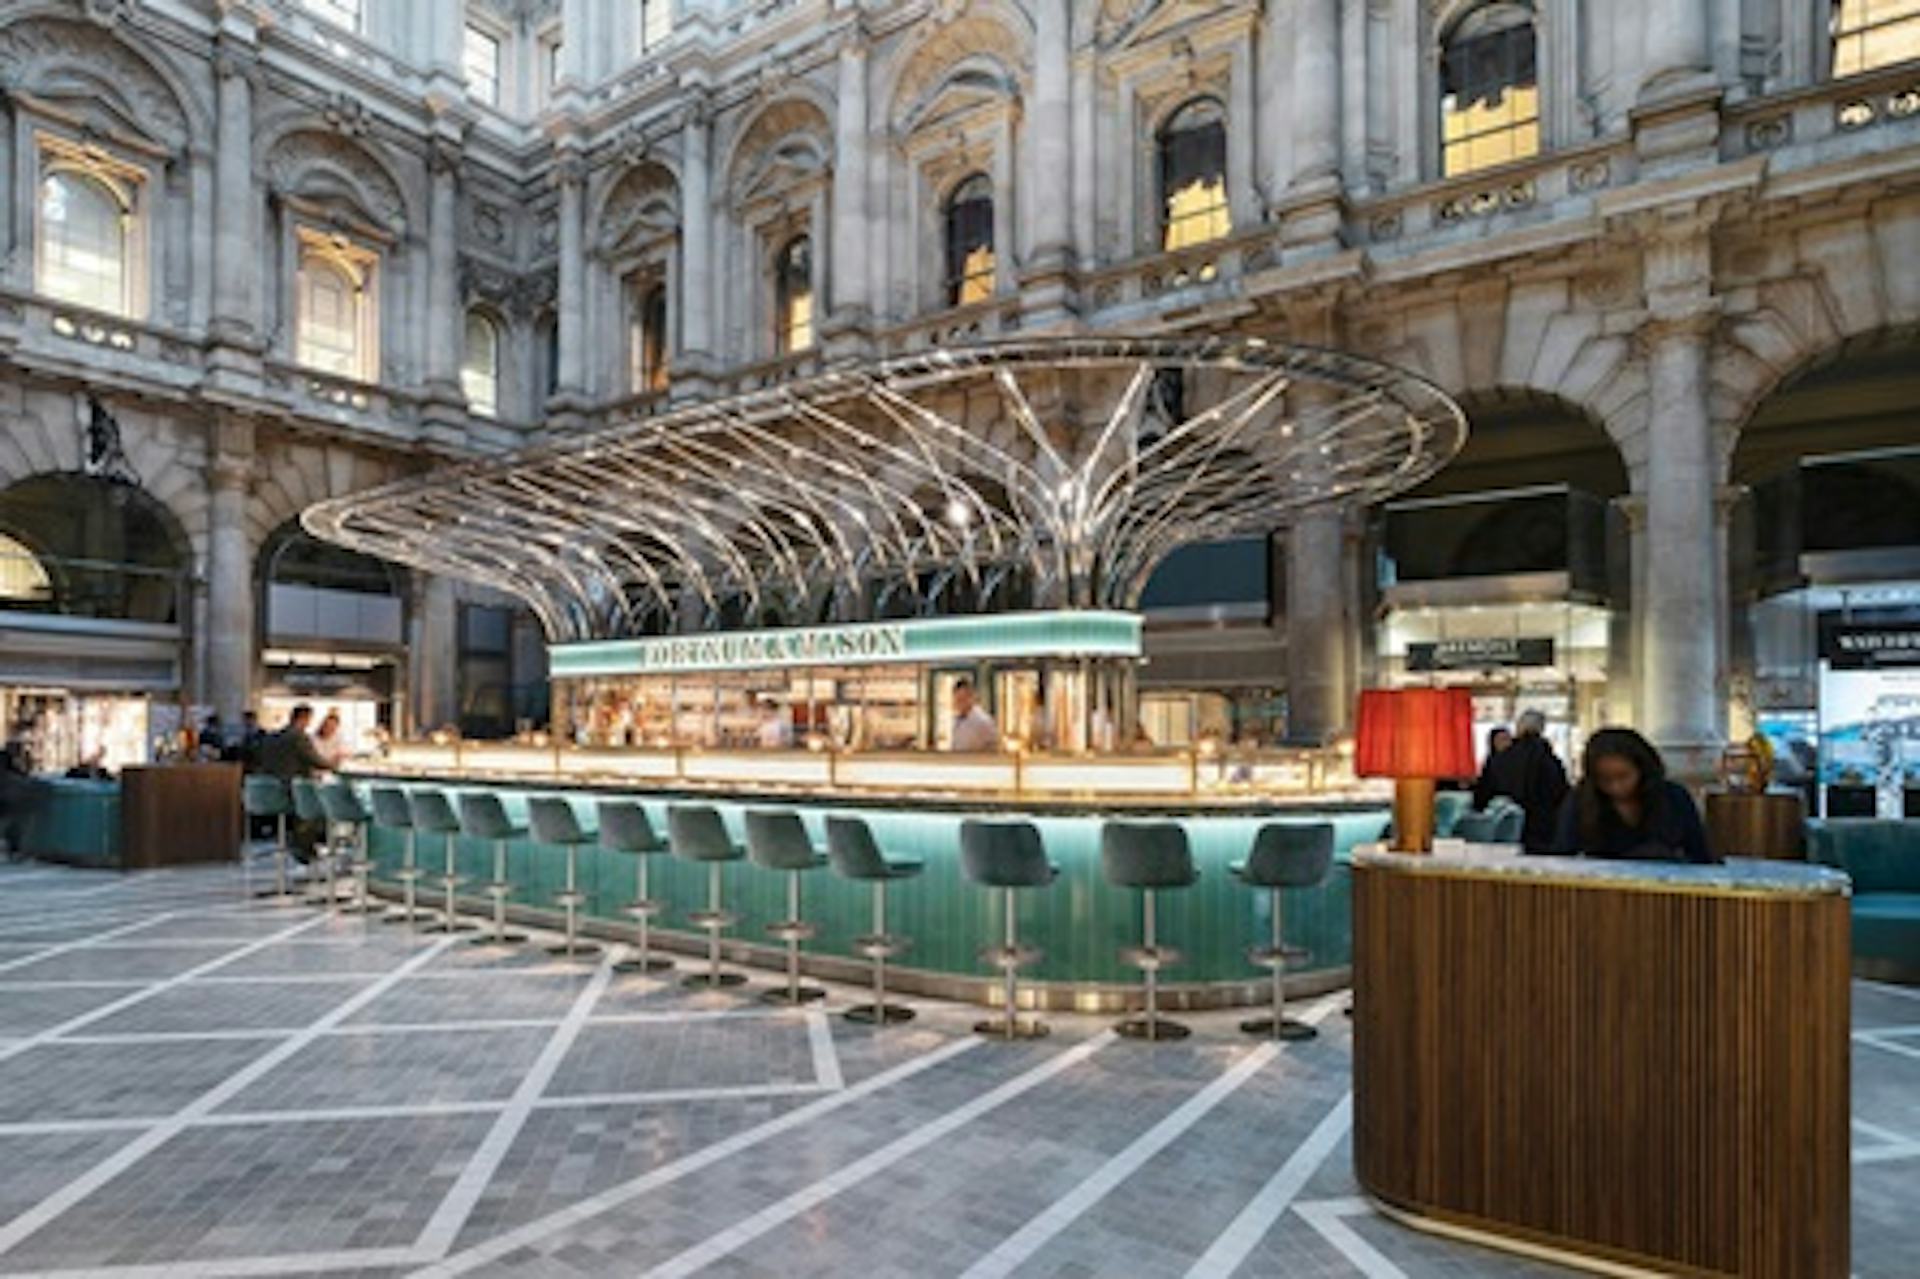 Visit St Pauls Cathedral and Two Course Dinner with Cocktail at Fortnum & Mason, Royal Exchange for Two